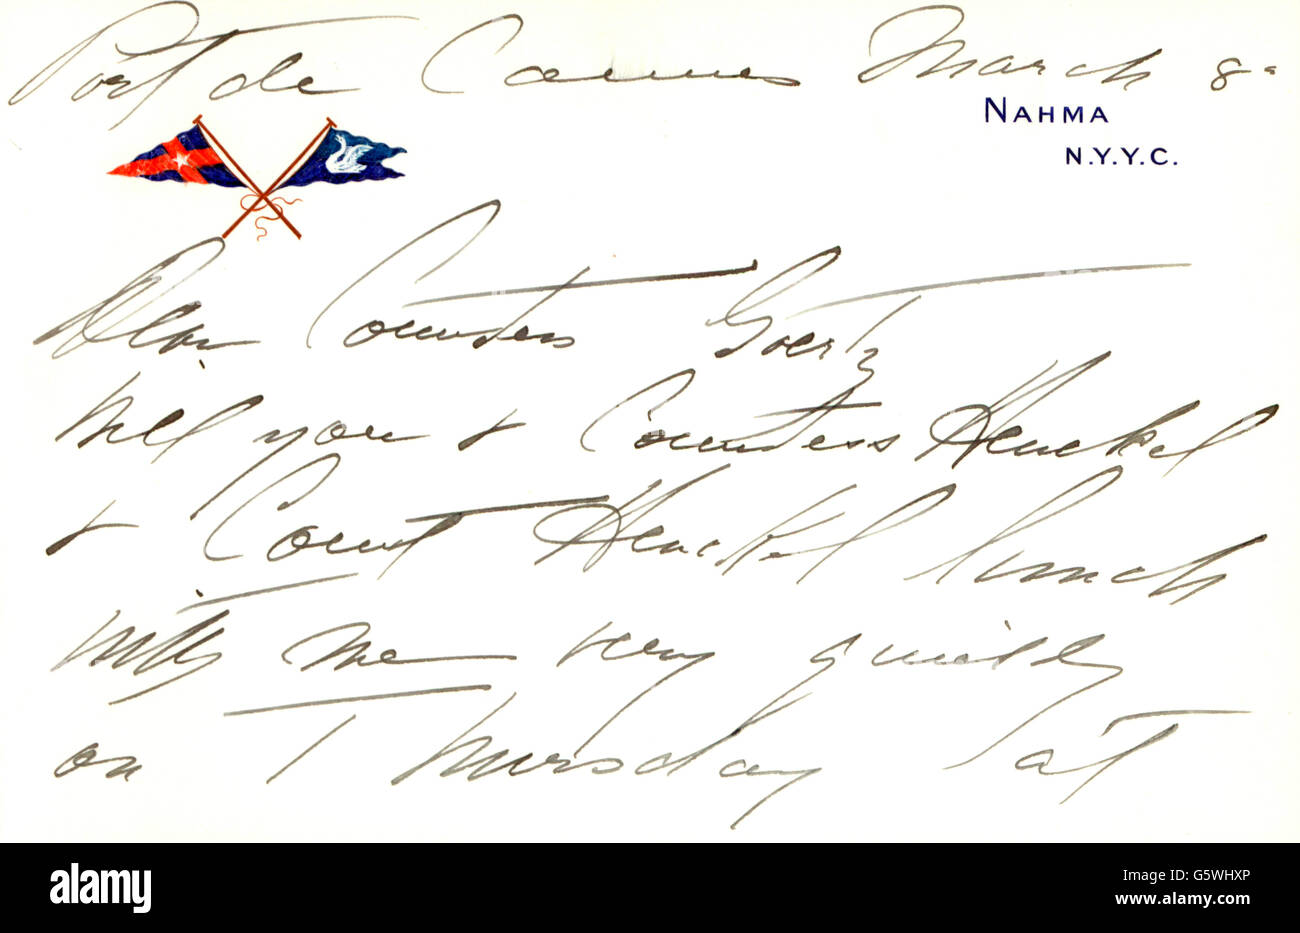 Goelet, Robert, 29.9.1841 - 27.4.1899, American businessman, invitation card of his wife Henrietta to the countess Goertz for lunch on her yacht 'Nahma', Cannes, 8.3.1910, Stock Photo